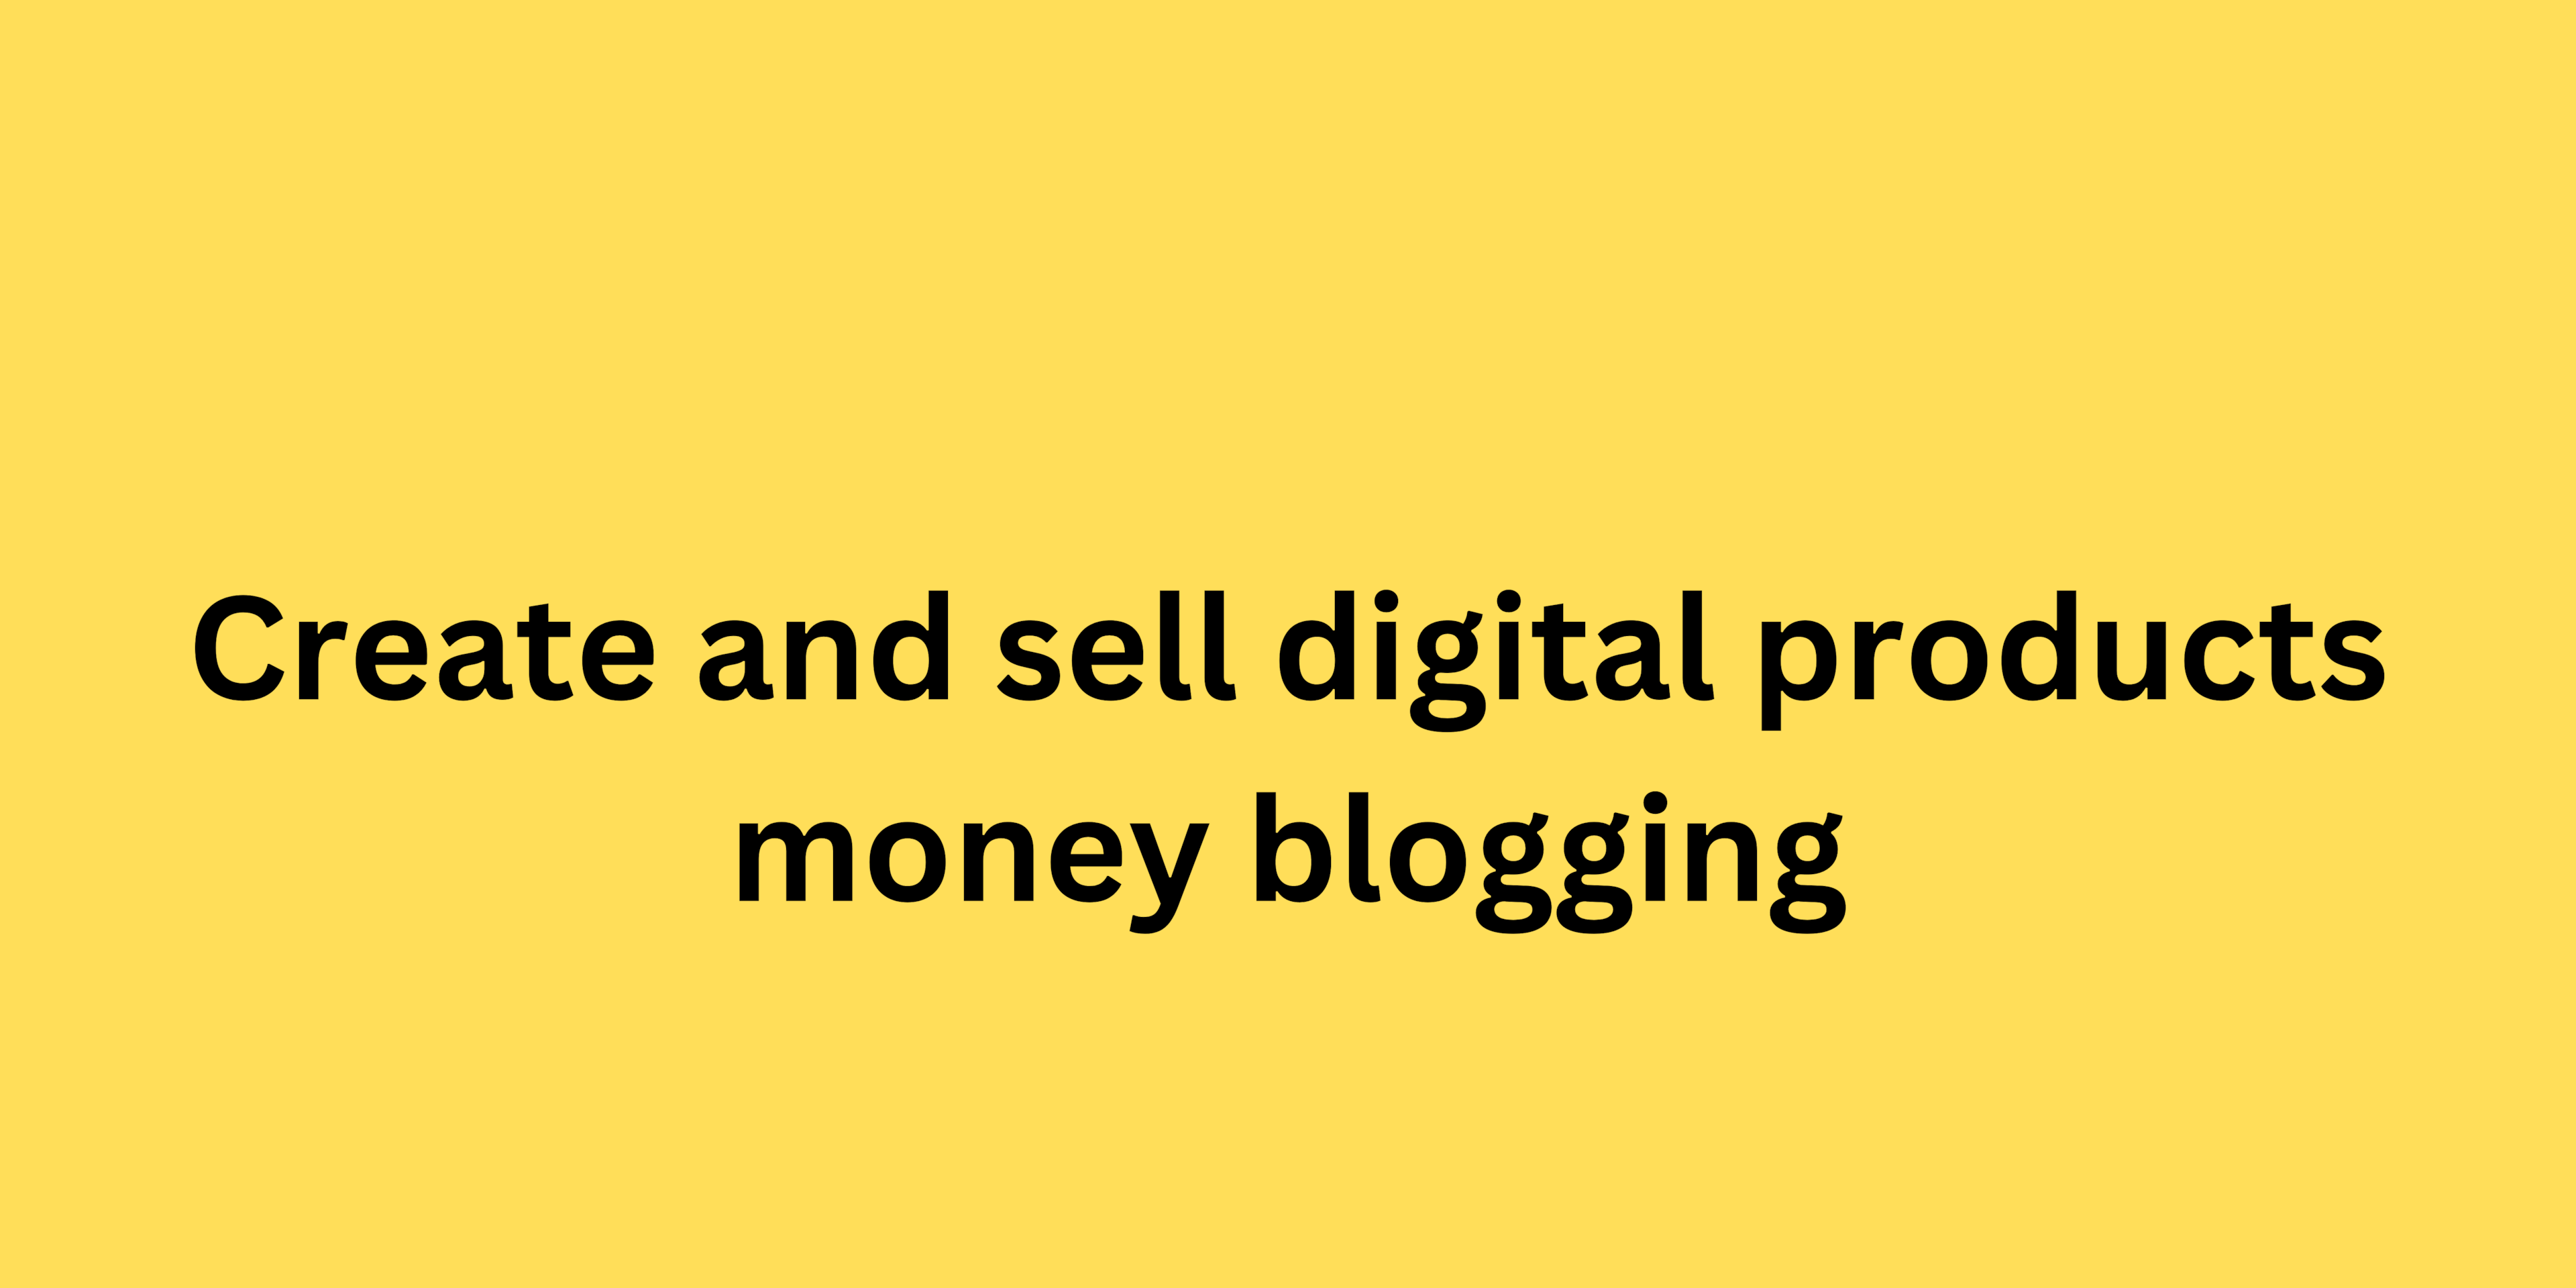 Create and sell digital products money blogging